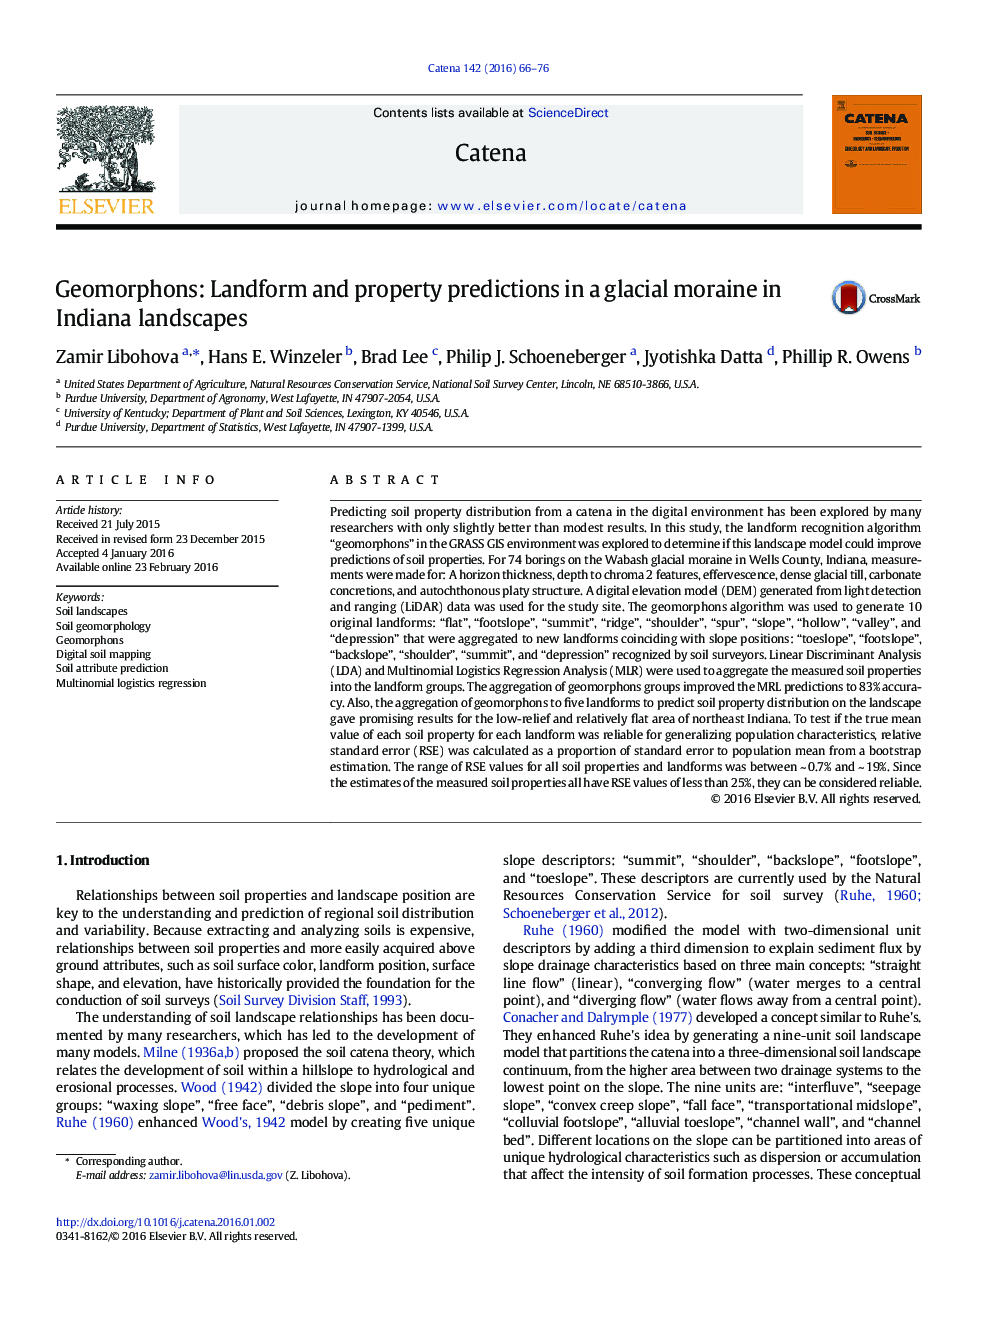 Geomorphons: Landform and property predictions in a glacial moraine in Indiana landscapes